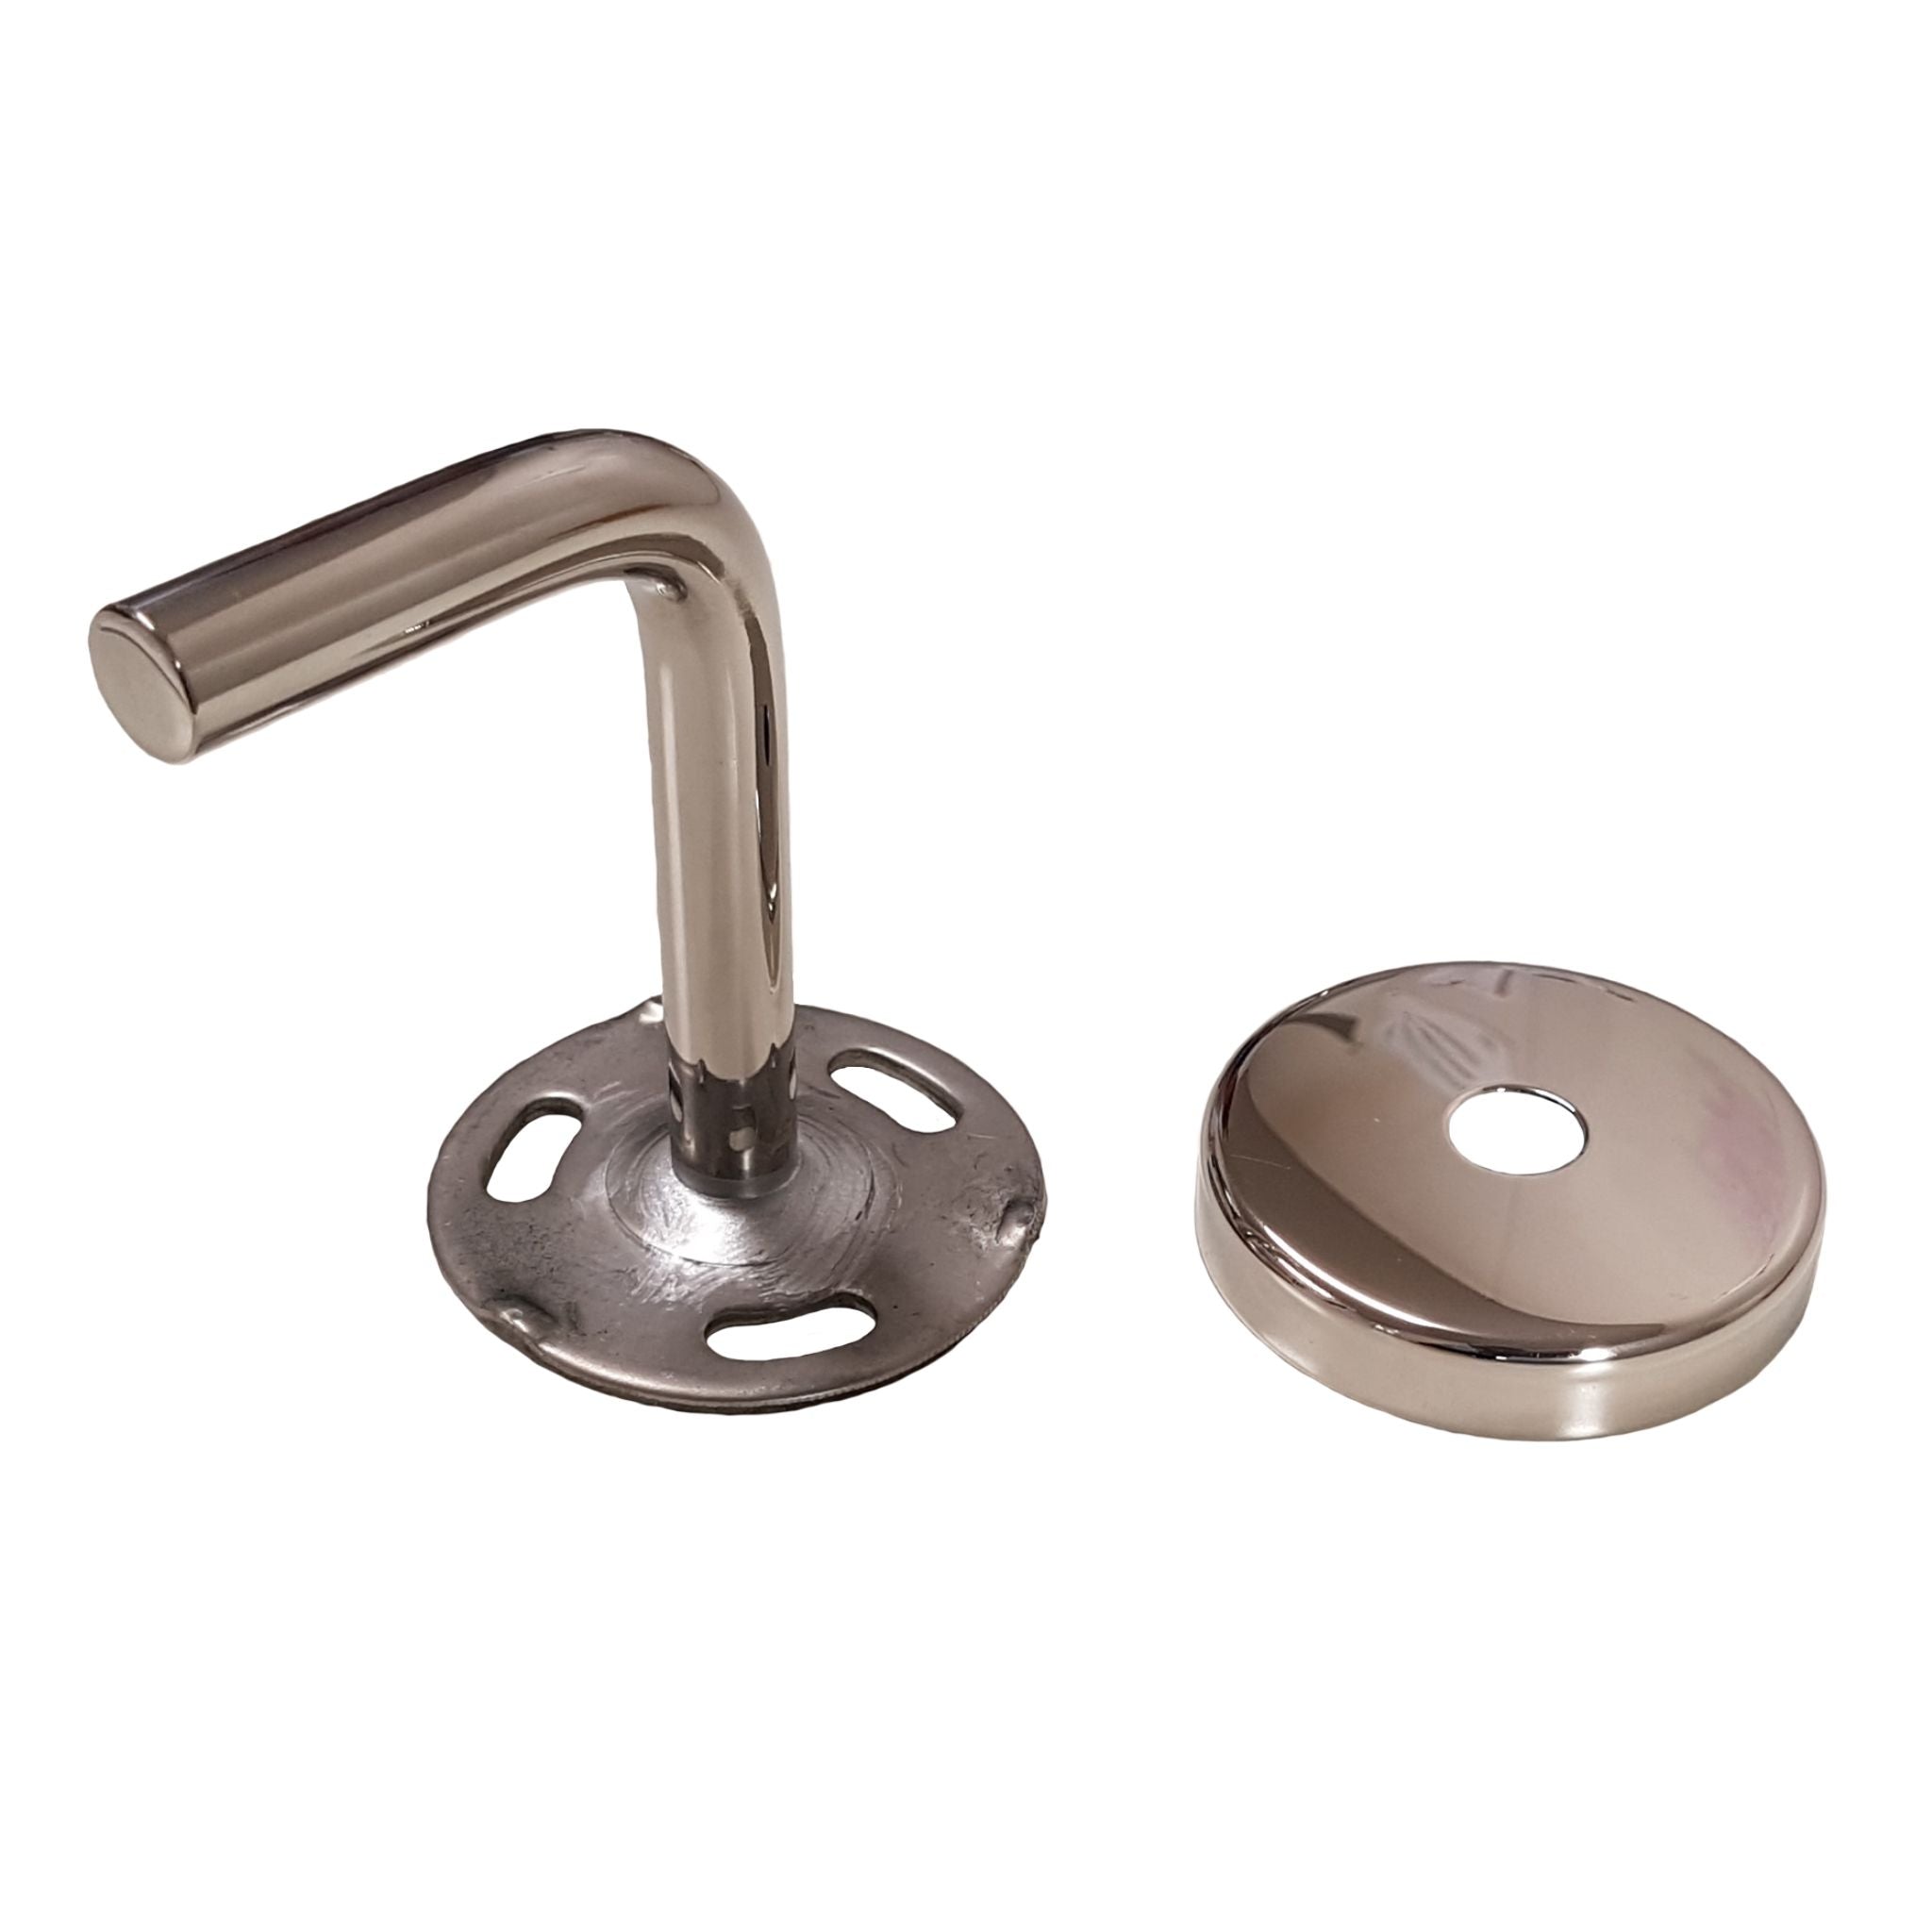 Handrail Bracket - Wallmount - Solid Bar - Stainless Steel Products